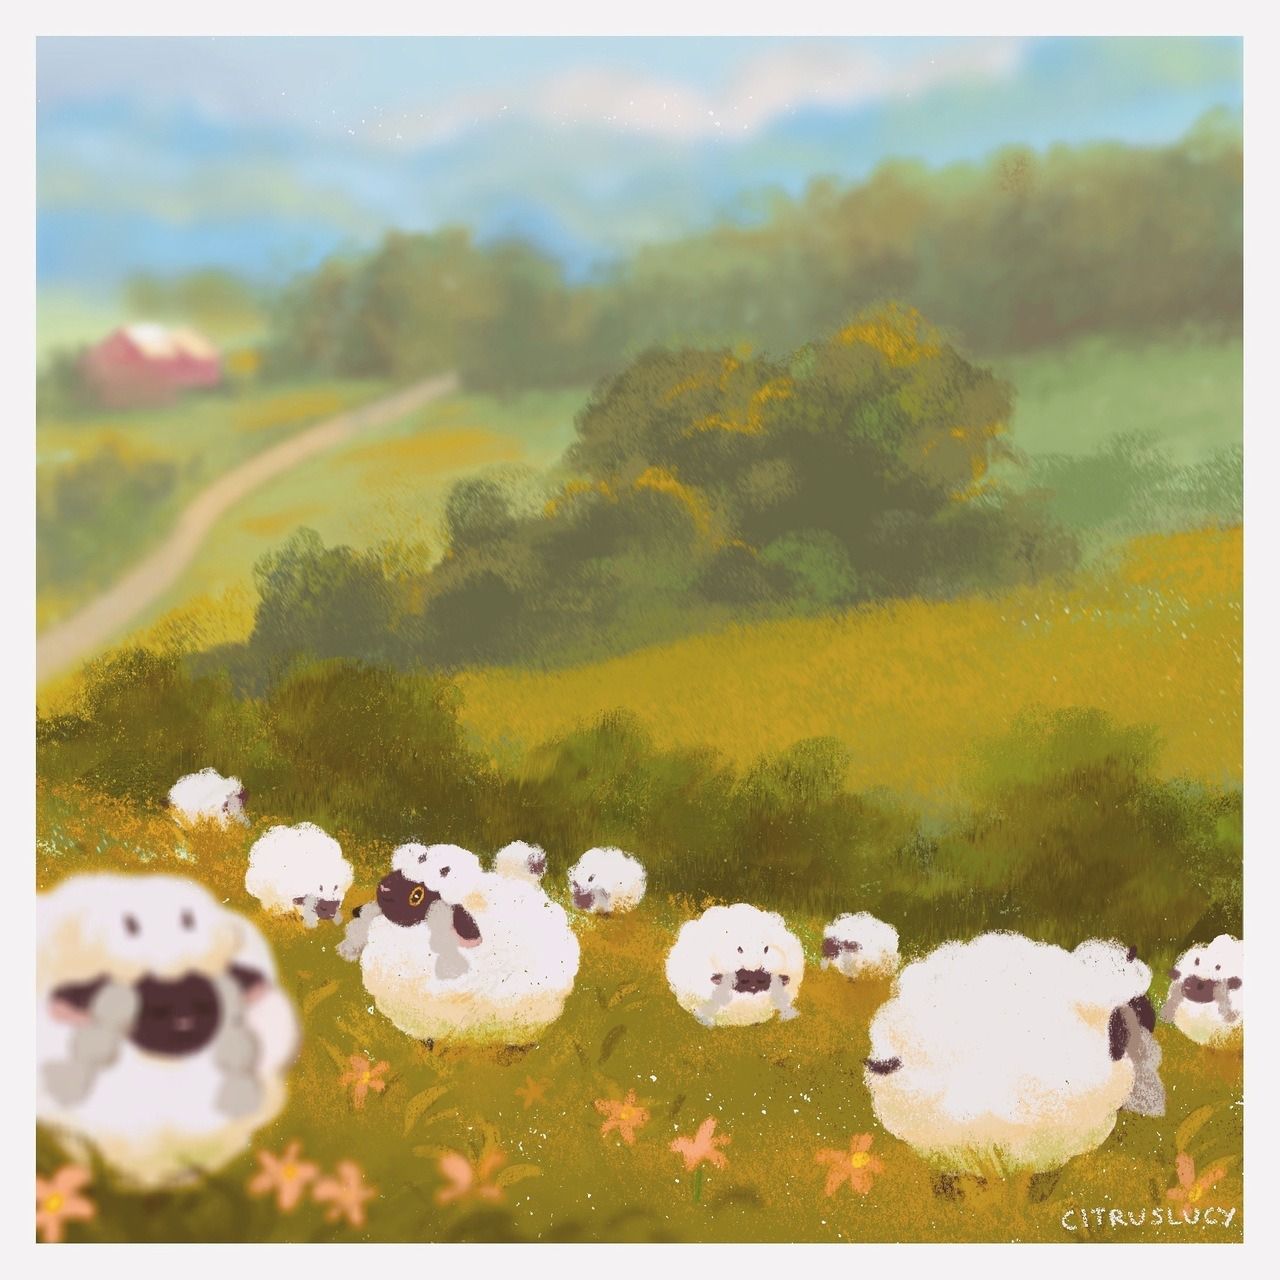 Pokemon 10 Pieces Of Wooloo Fan Art That Are Adorable